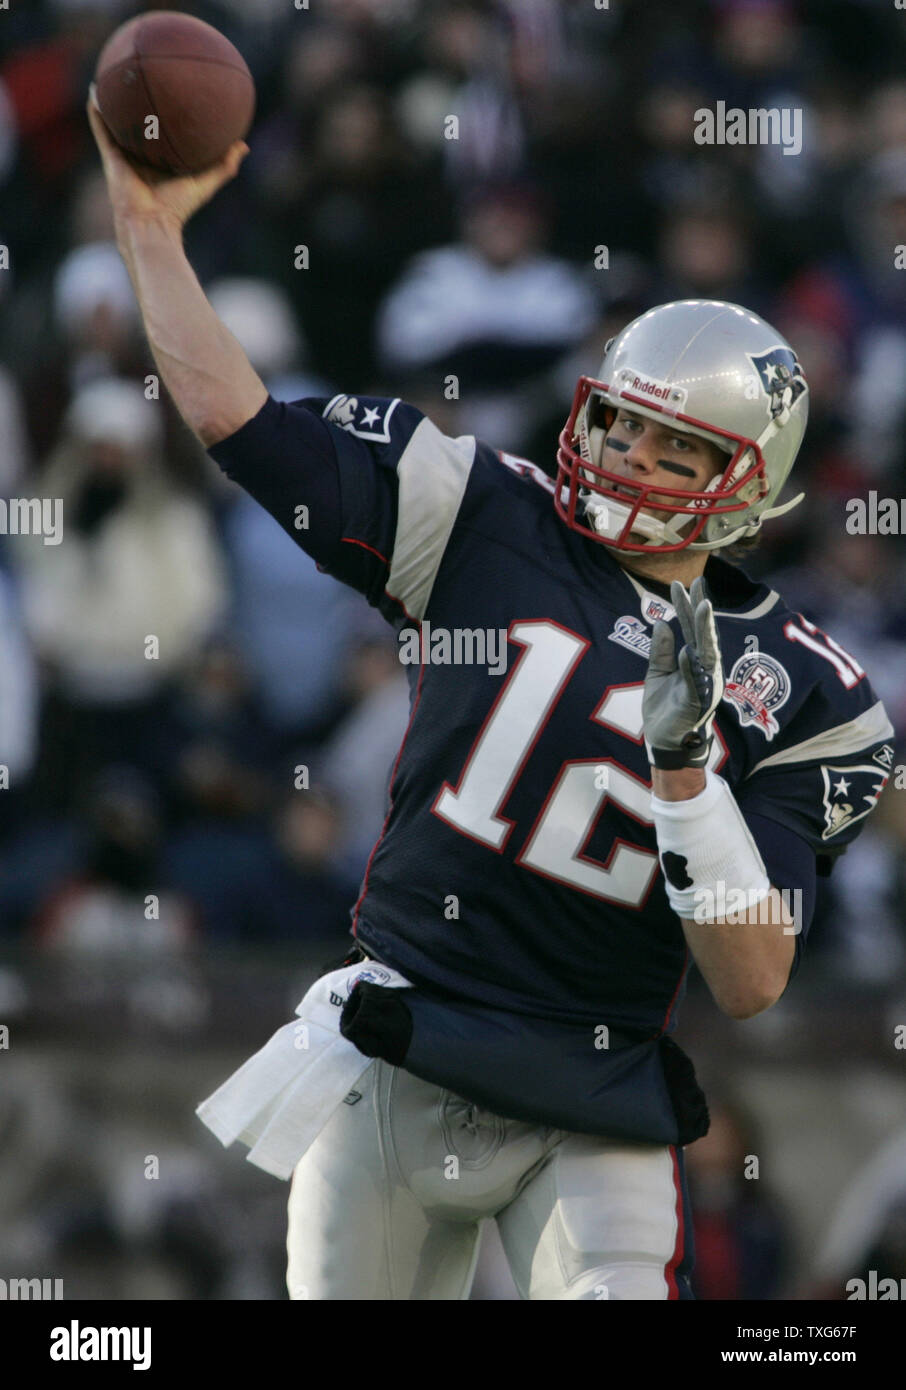 New England Patriots quarterback Tom Brady (12) throws a pass in the first quarter against the Baltimore Ravens at Gillette Stadium in Foxboro, Massachusetts on January 10, 2010.  The Ravens defeated the Patriots 33-14.   UPI/Matthew Healey Stock Photo